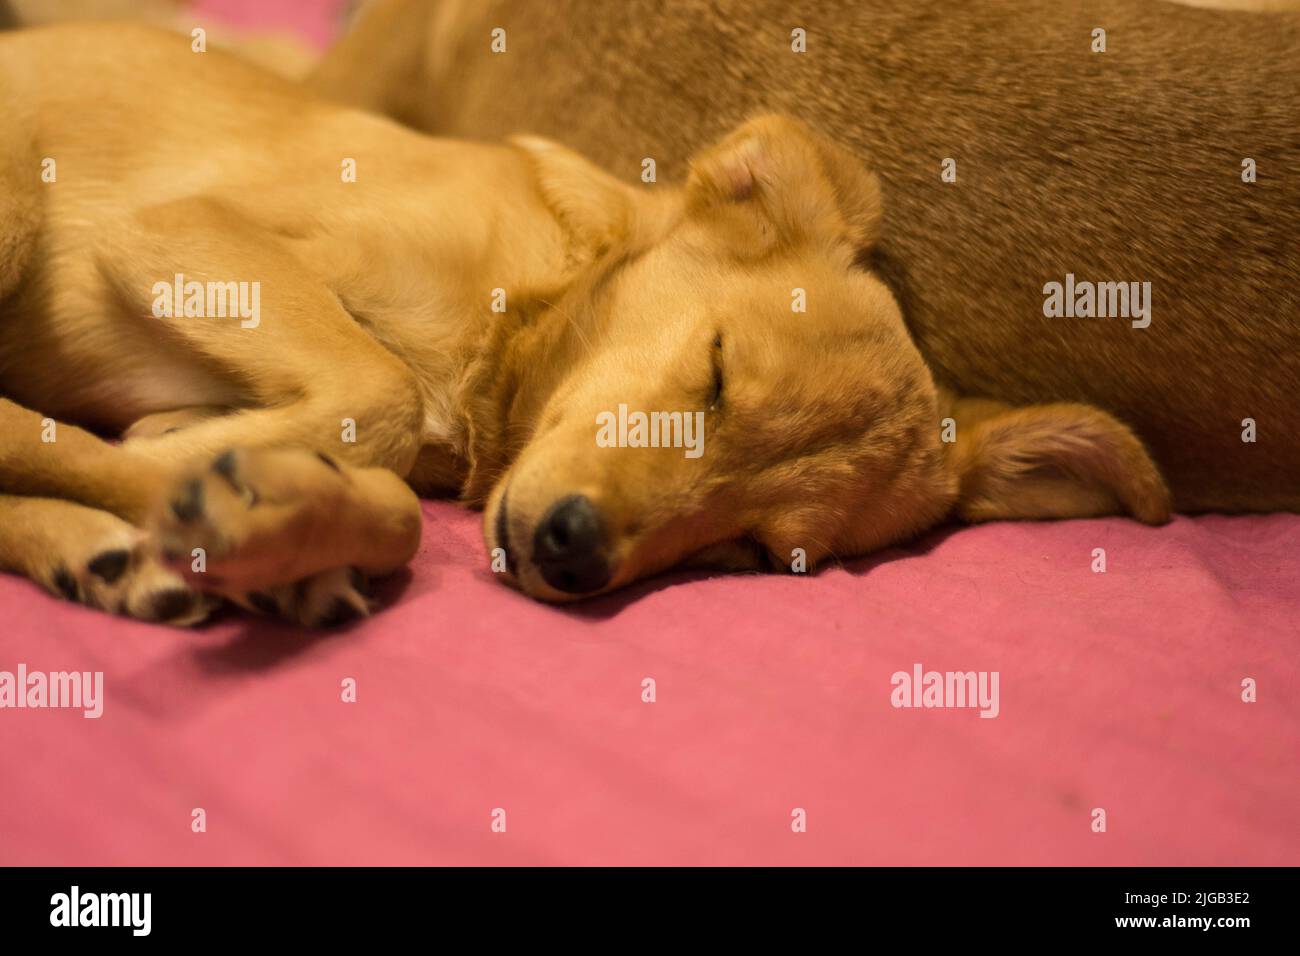 A brown puppy sleeping on a pink couch Stock Photo